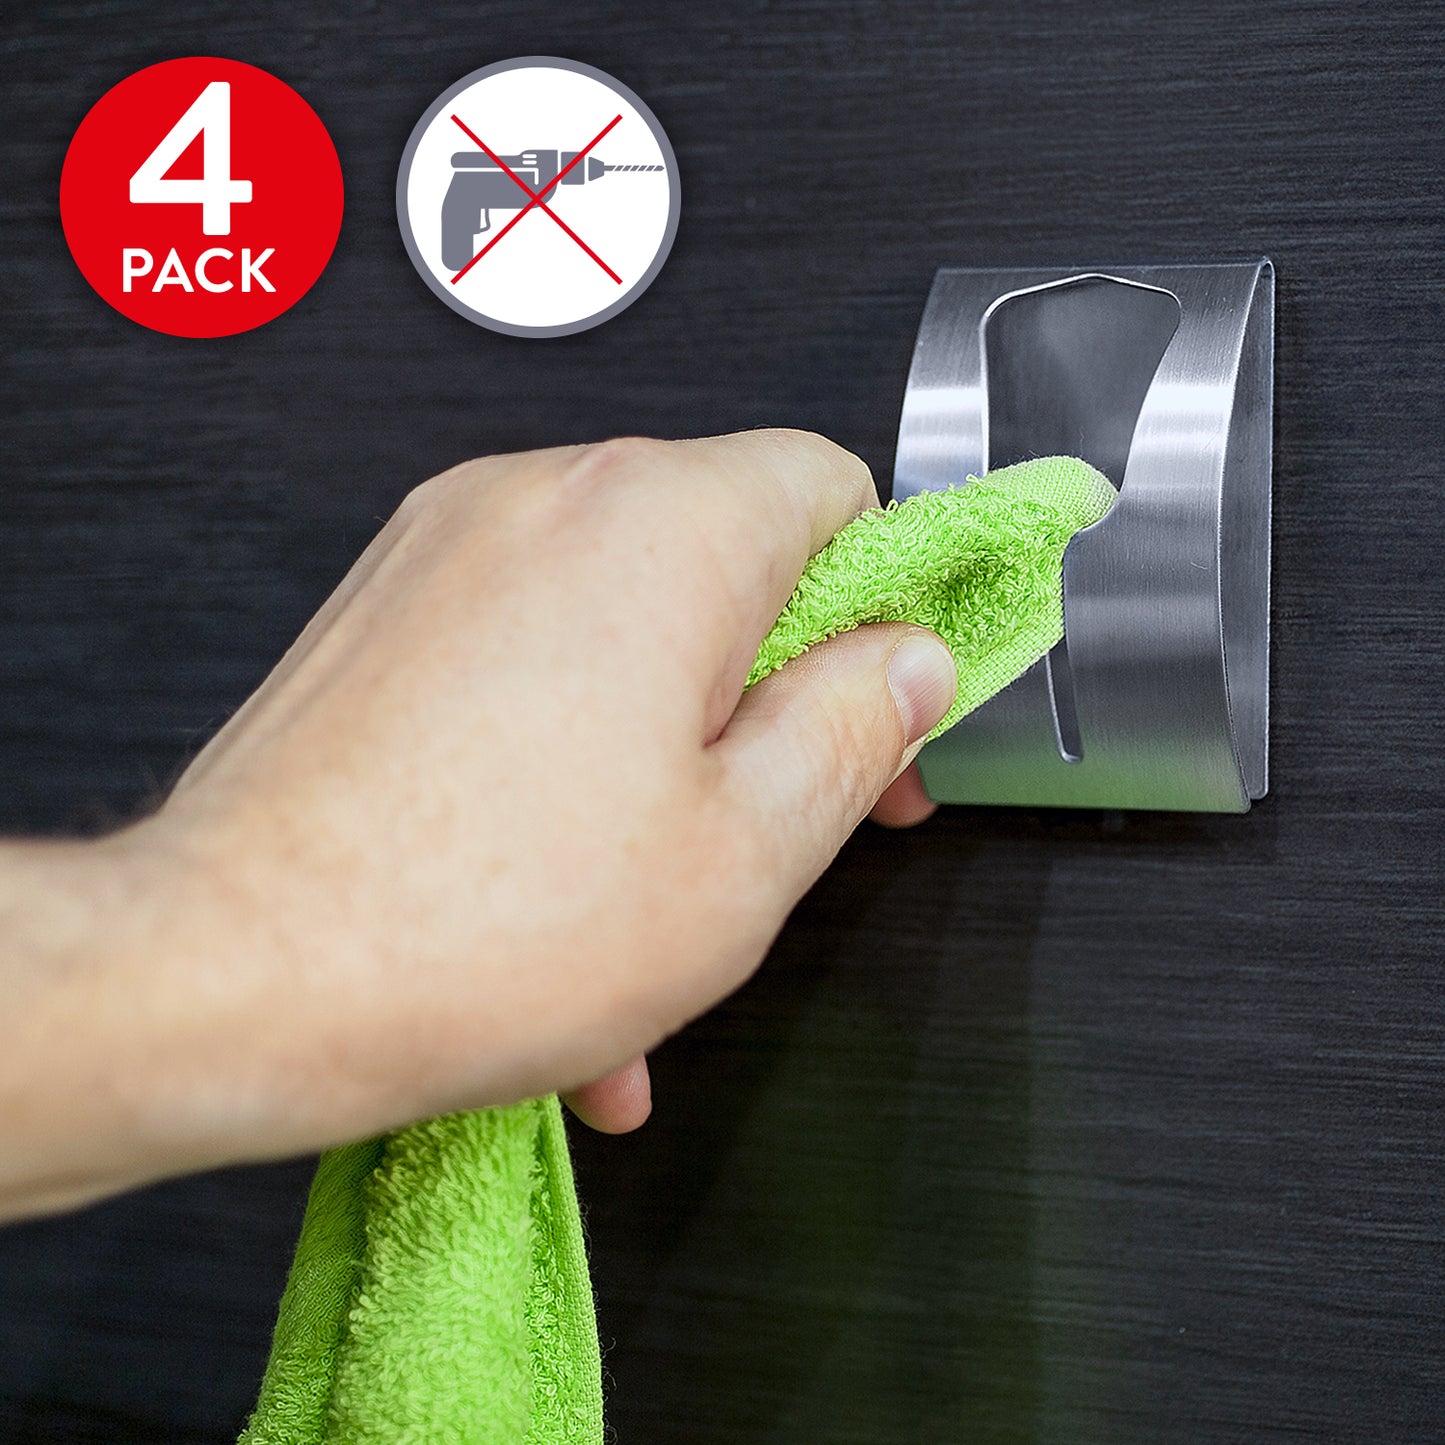 Pack of 4 Self Adhesive Tea Towel Holder, Towel Rail for Bathroom and Kitchen